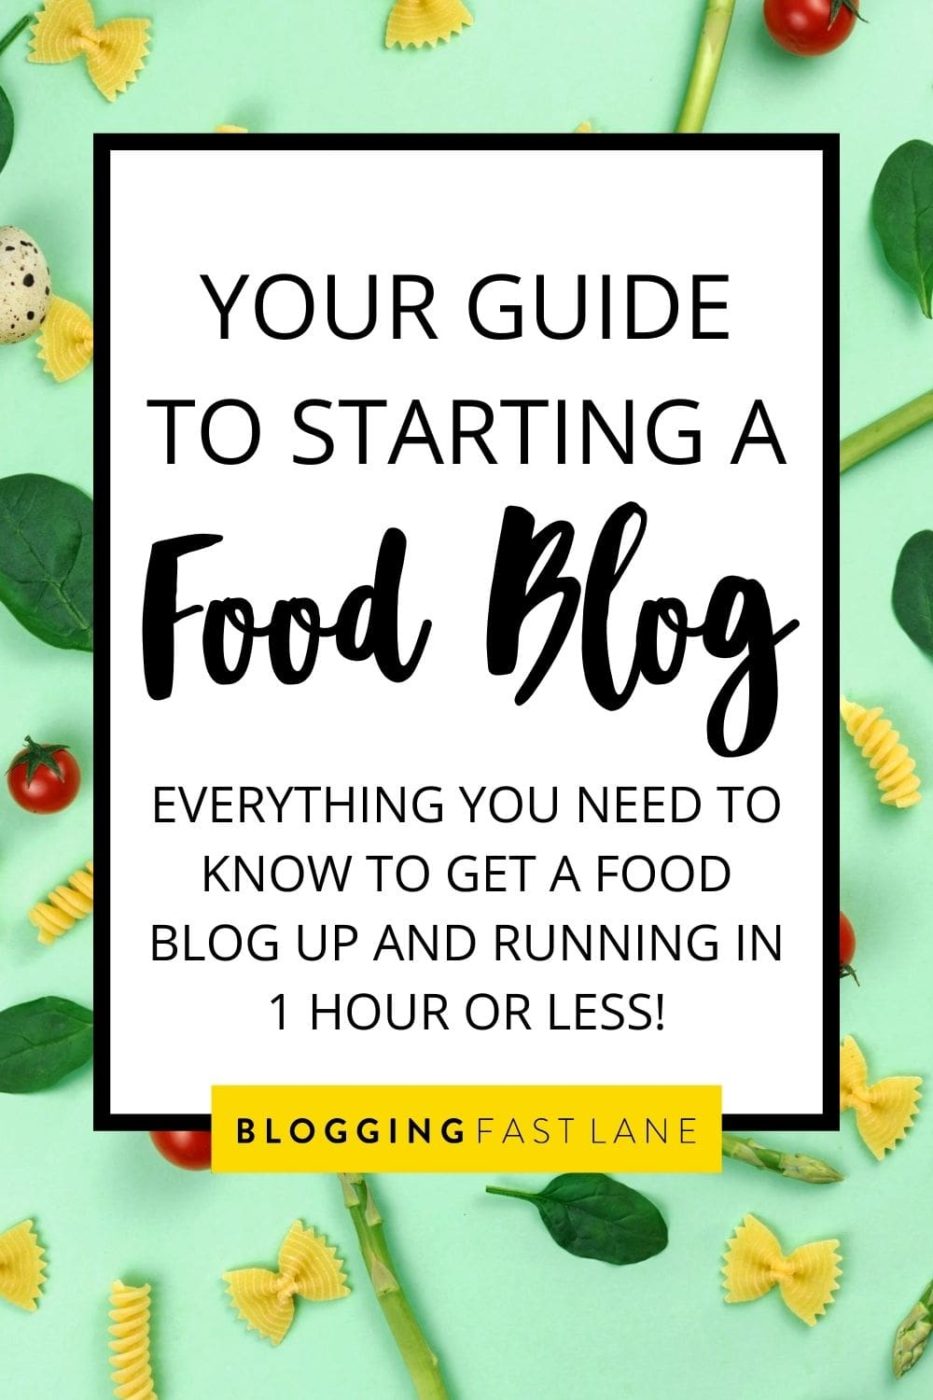 How to Start a Food Blog | Ever dreamed of becoming a food blogger? With our 5 step guide, you can have your food blog up and running today! Click here to check it out.